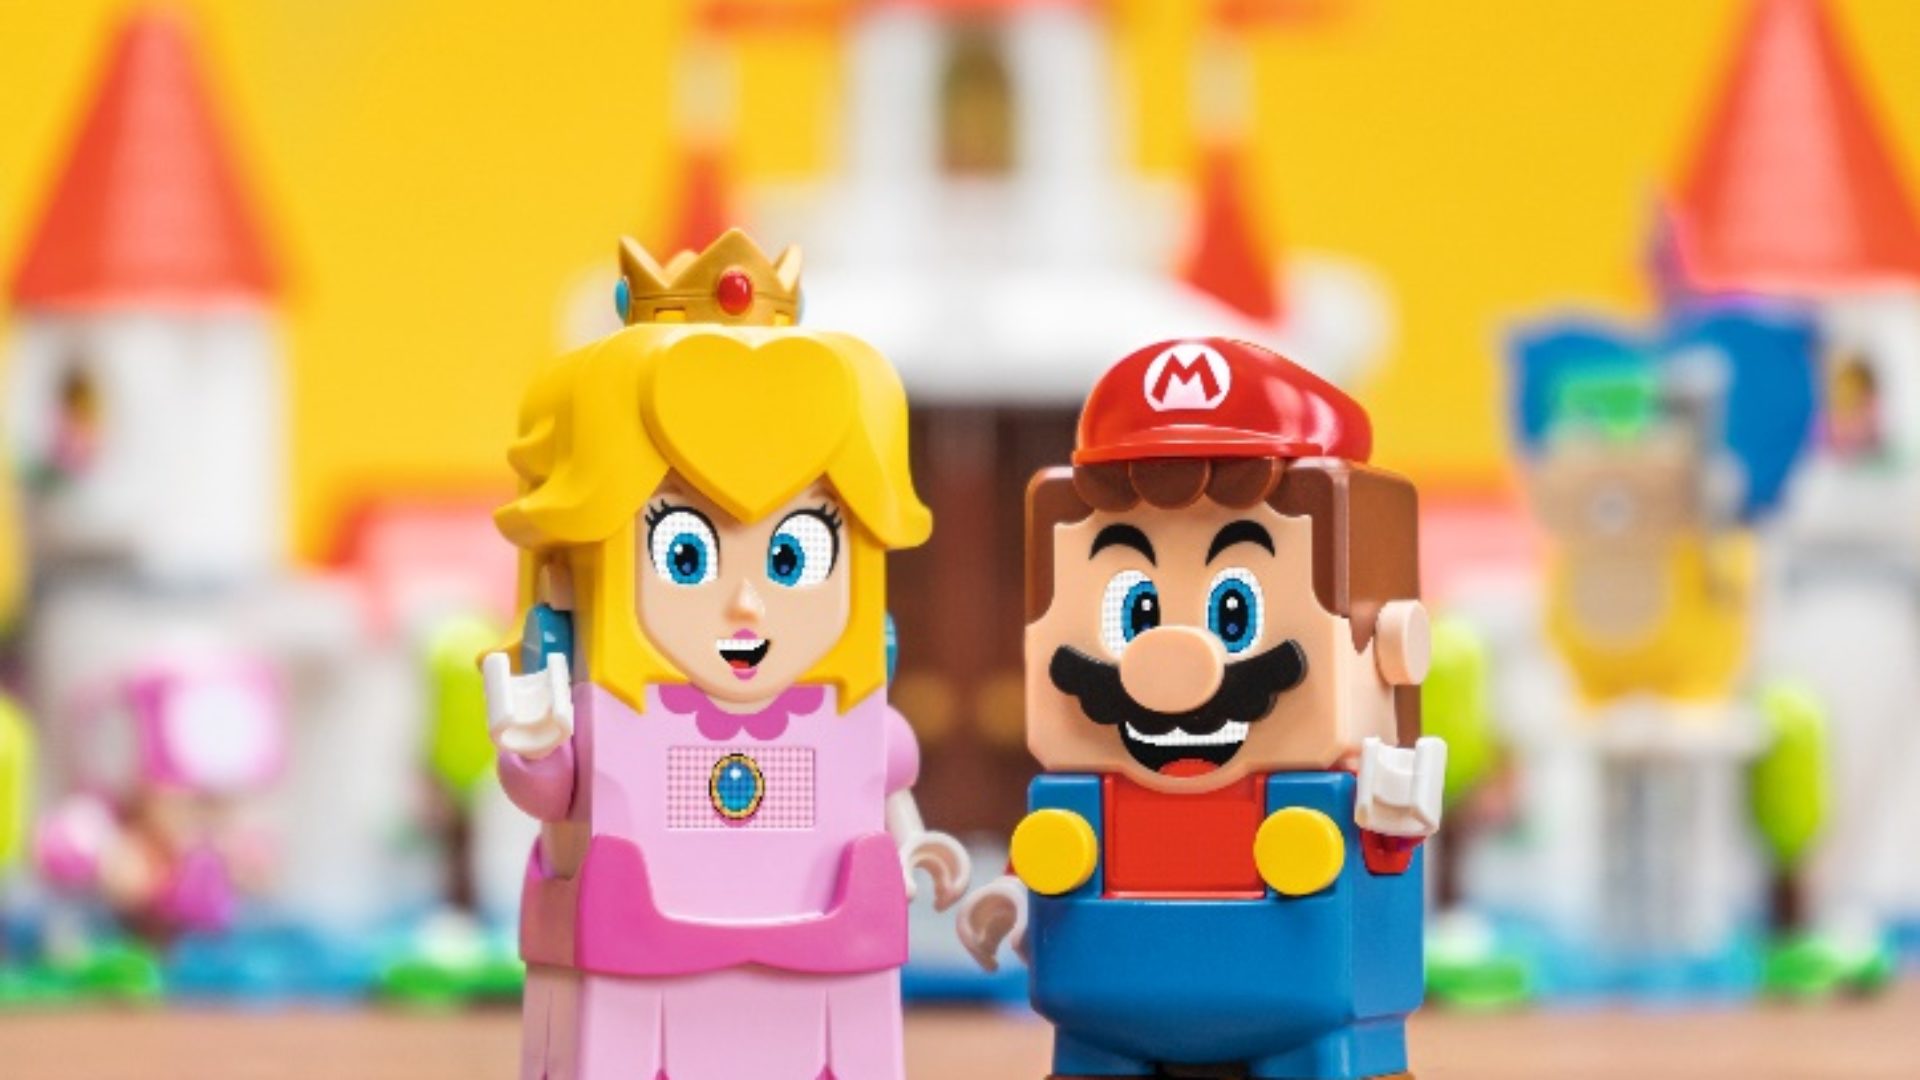 LEGO Princess Peach is coming this summer! 

